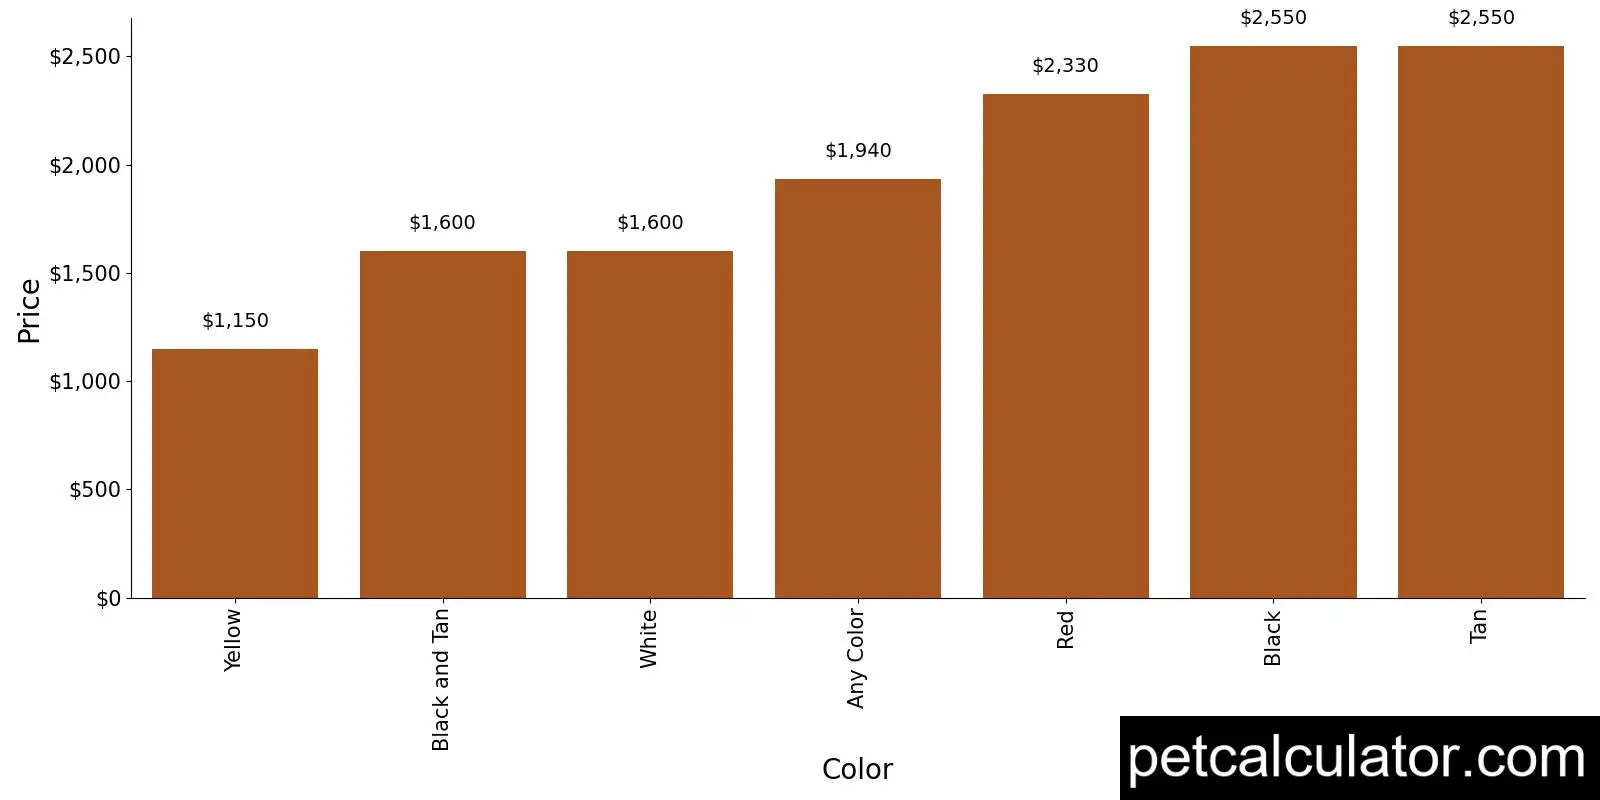 Price of Lakeland Terrier by Color 